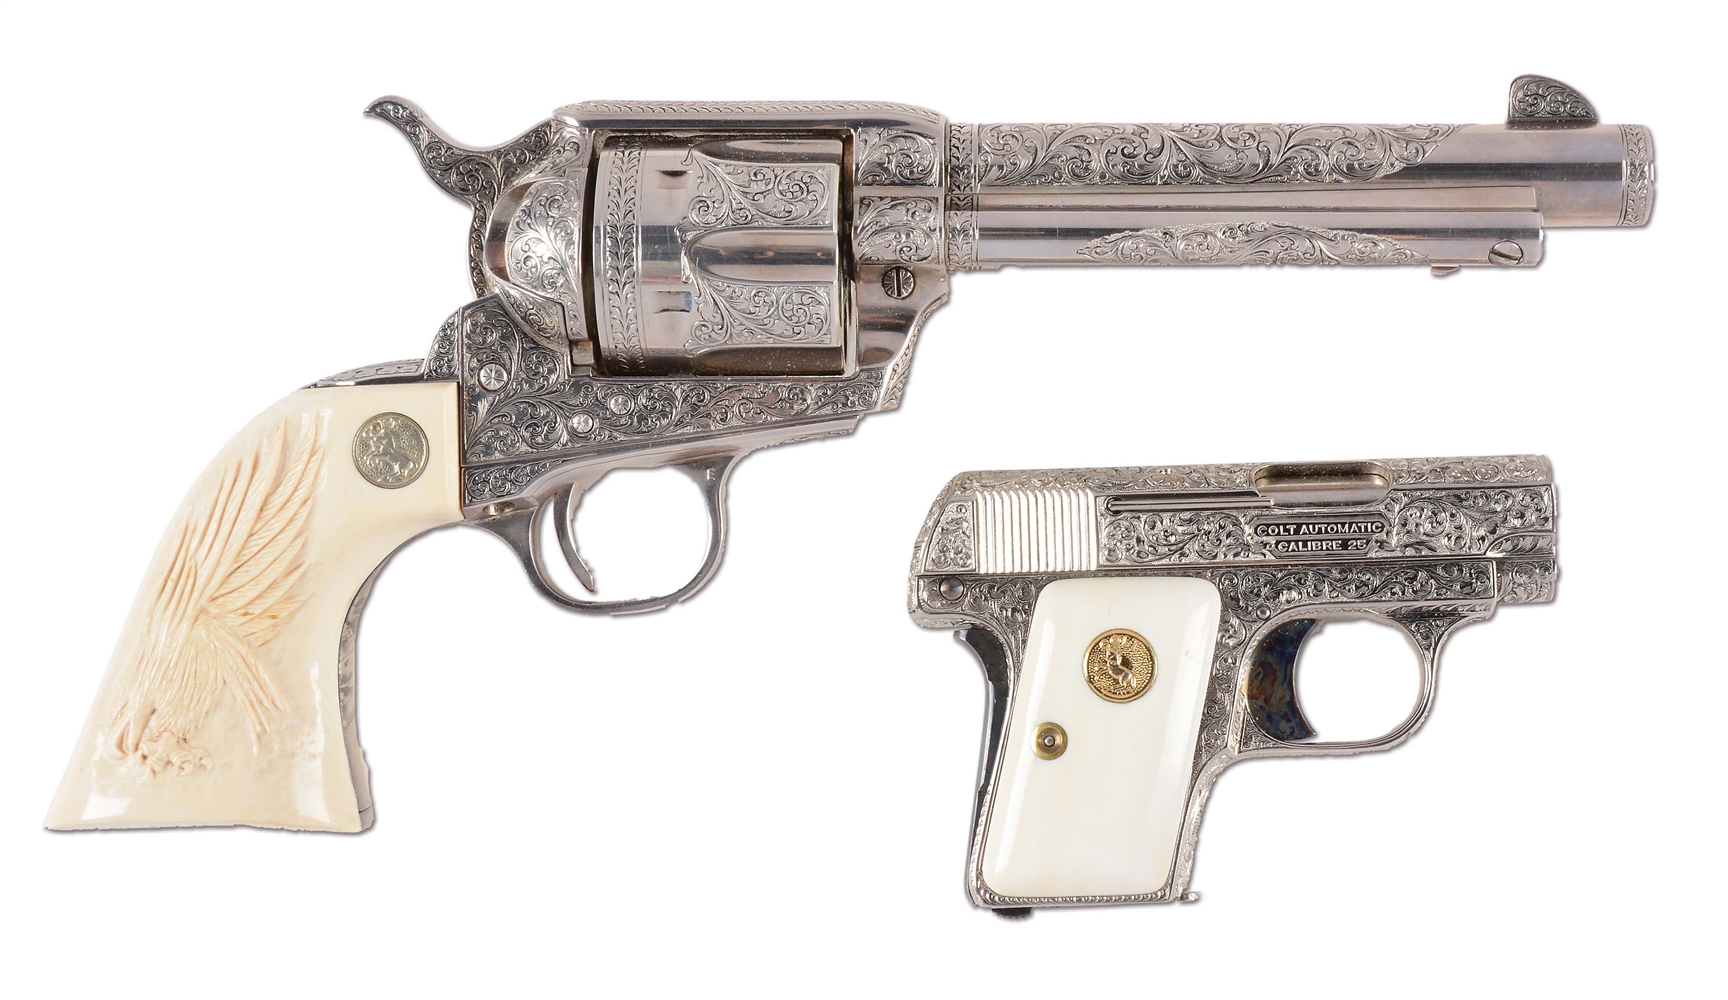 (M) LOT OF 2: ENGRAVED COLT SINGLE ACTION ARMY REVOLVER & ENGRAVED COLT 1908 SEMI-AUTOMATIC PISTOL.